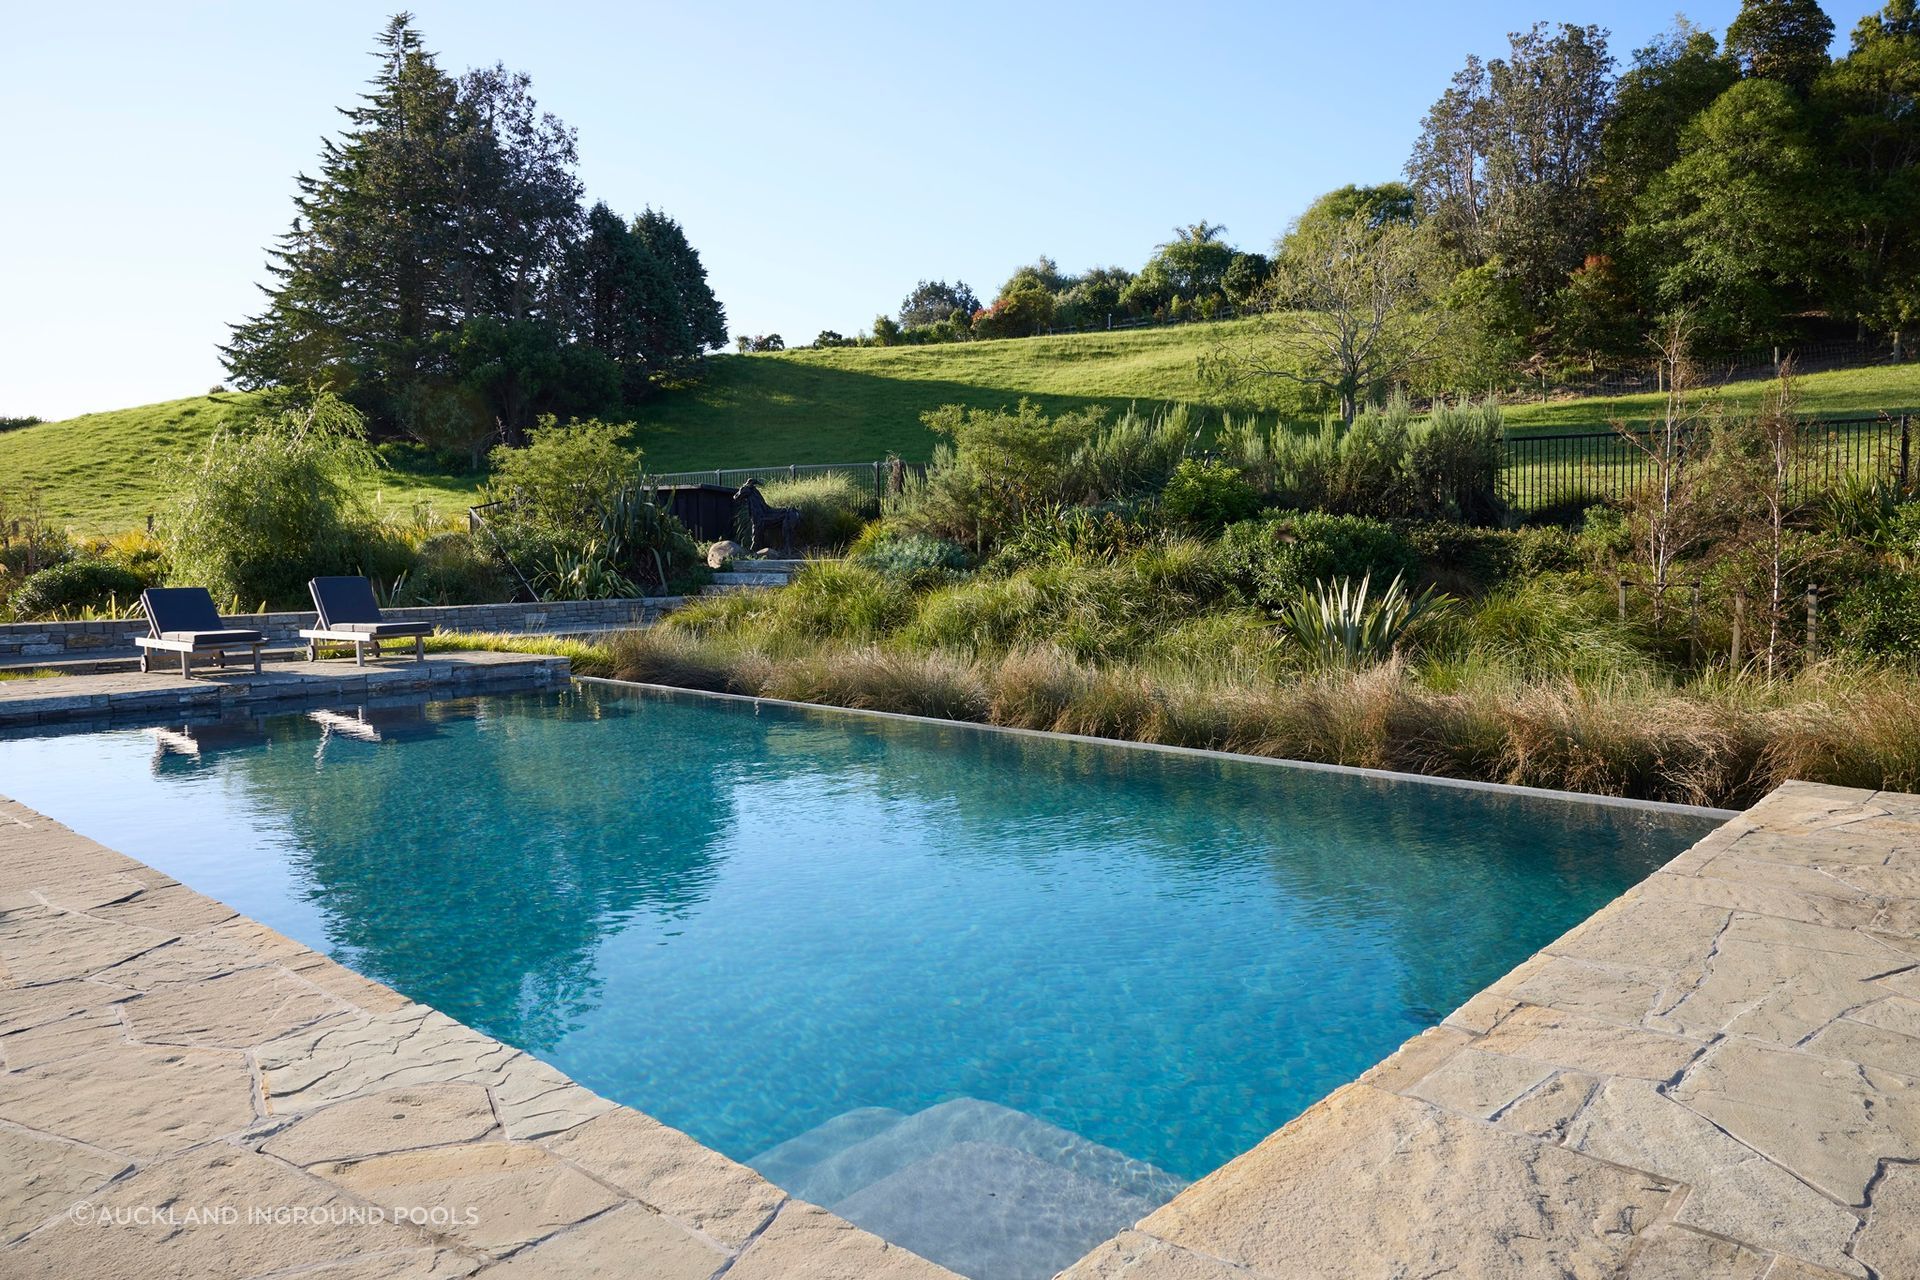 There has been a recent rise in natural and eco-friendly pool designs that blend in with the landscape, often including sustainable pool equipment.